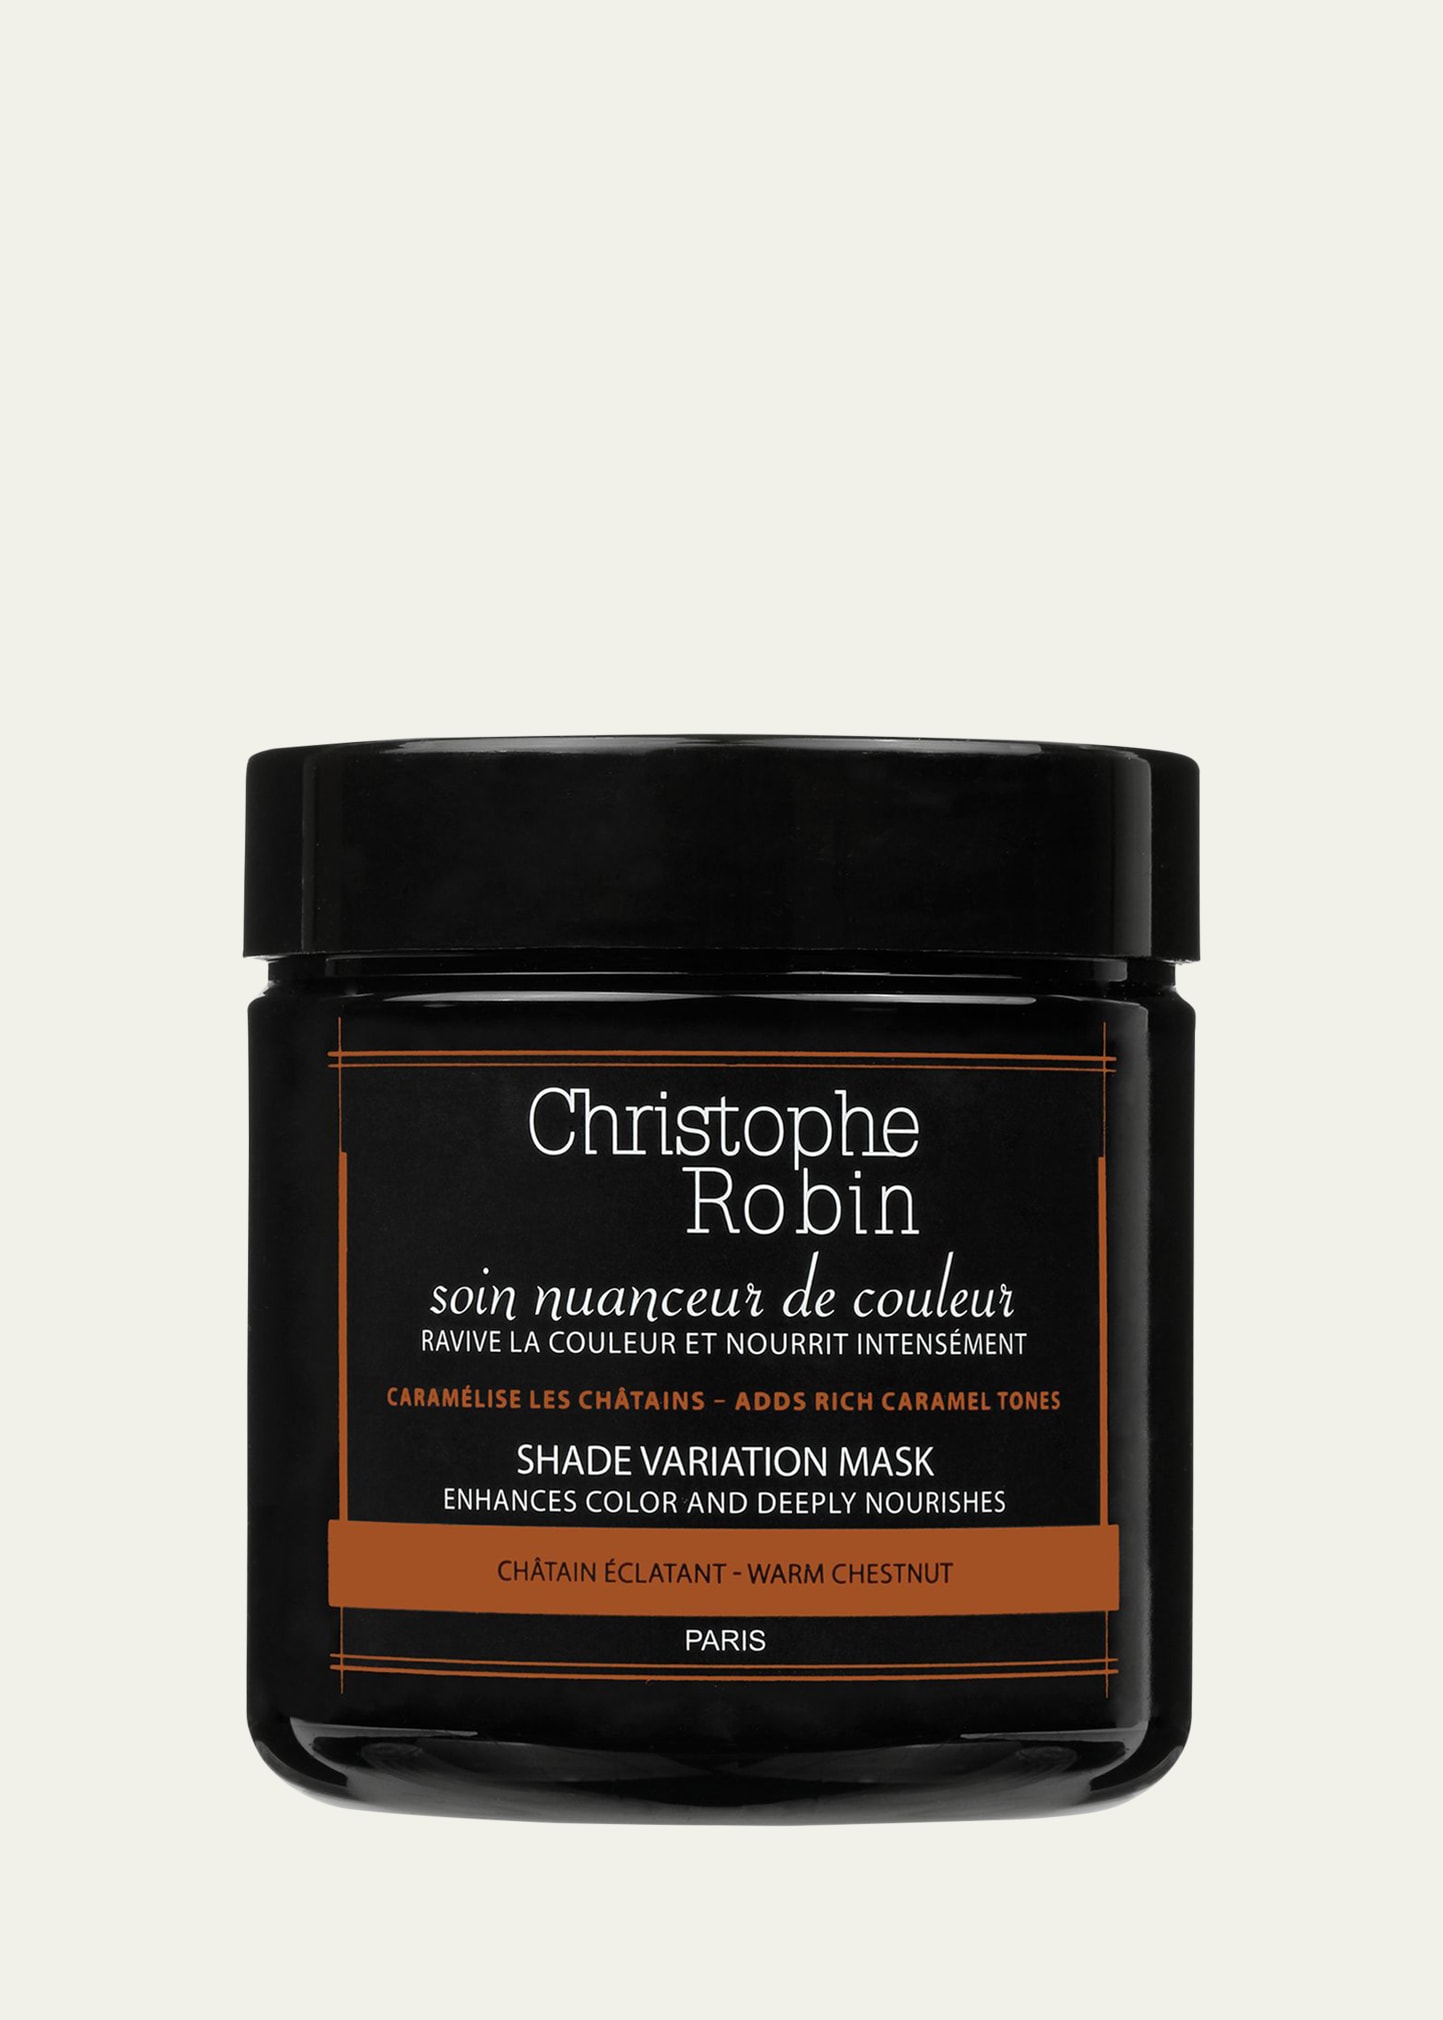 Christophe Robin Shade Variation Care Nutritive Mask with Temporary Coloring &#150; Warm Chestnut, 8.4 oz./ 250 mL